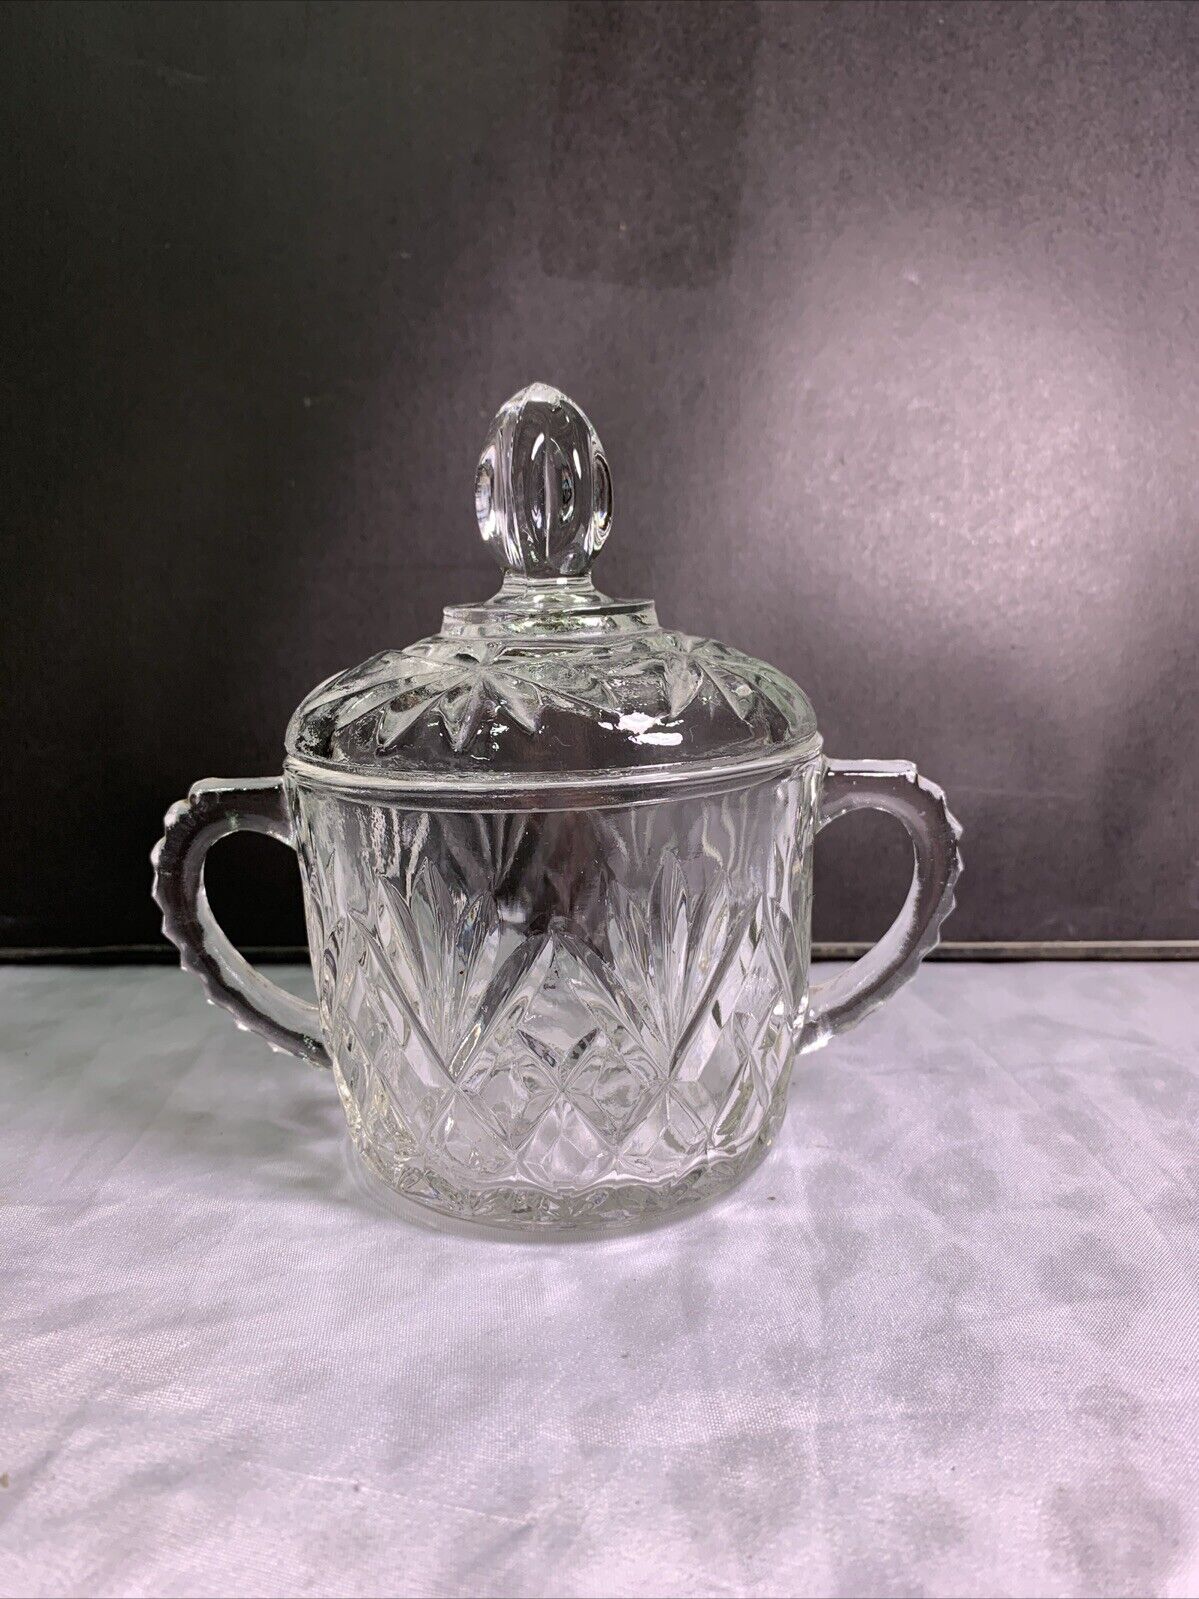 Vintage 1960s Anchor Hocking Covered Glass Sugar Bowl Iconic Everyday Casual 